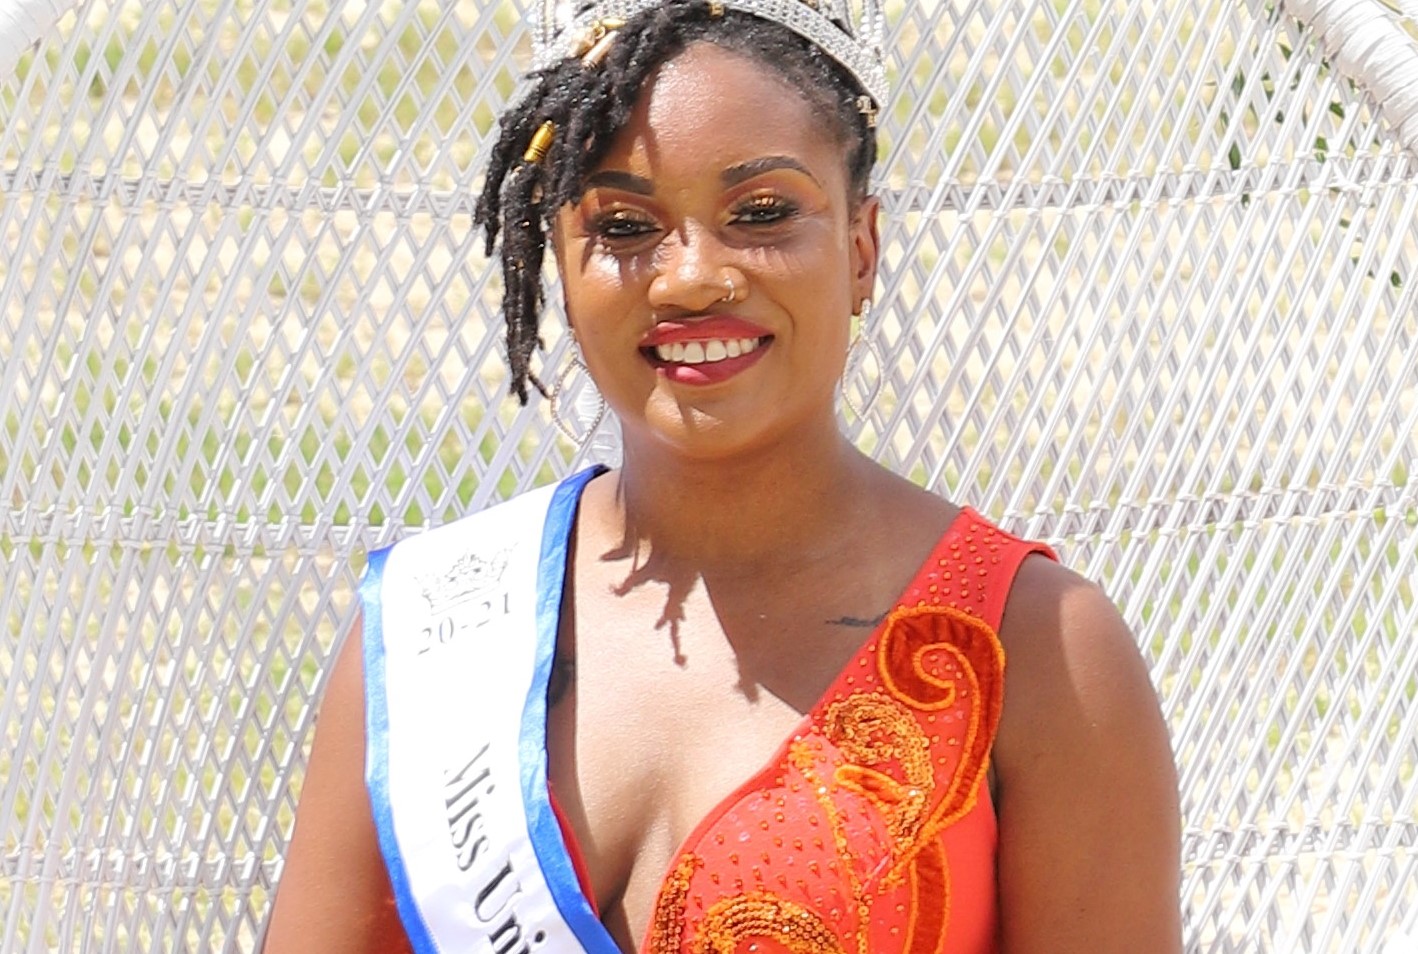 Raven Phillips Crowned Miss UVI At Ambassadorial Presentation In St. Thomas